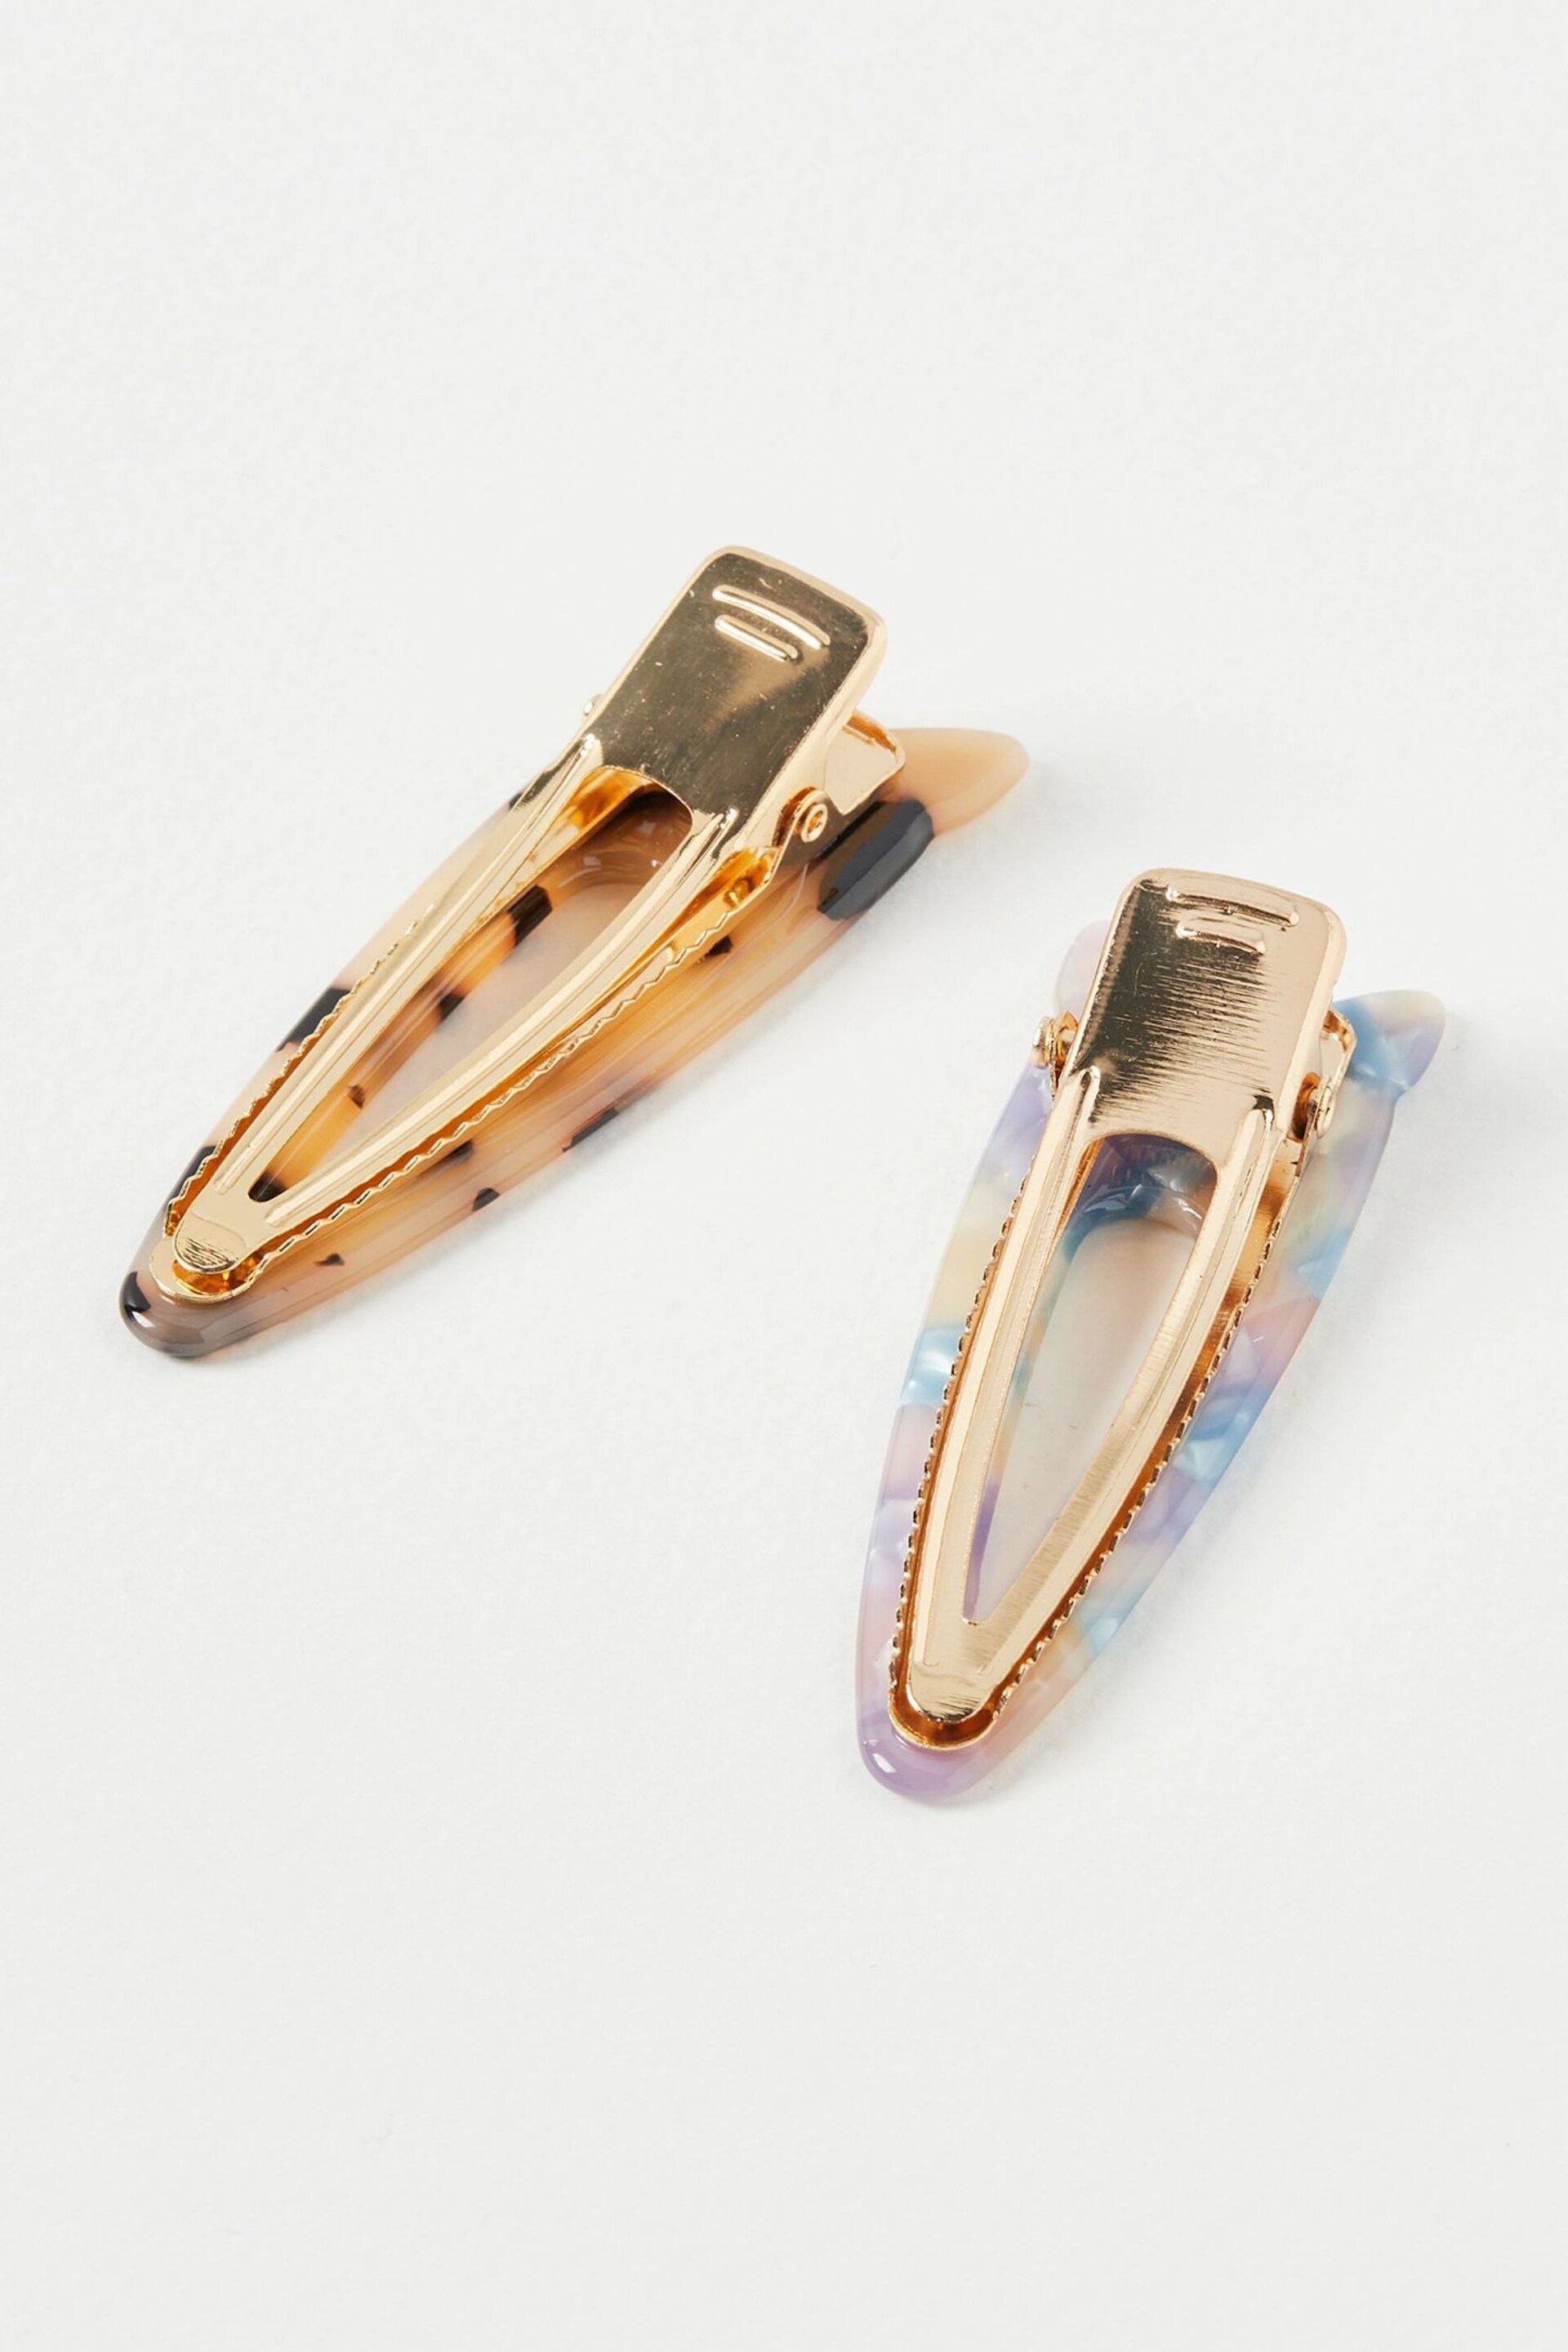 Oliver Bonas Natural Lexi Cat Marbled Resin Natural Hair Clips 2 Pack - Image 3 of 6